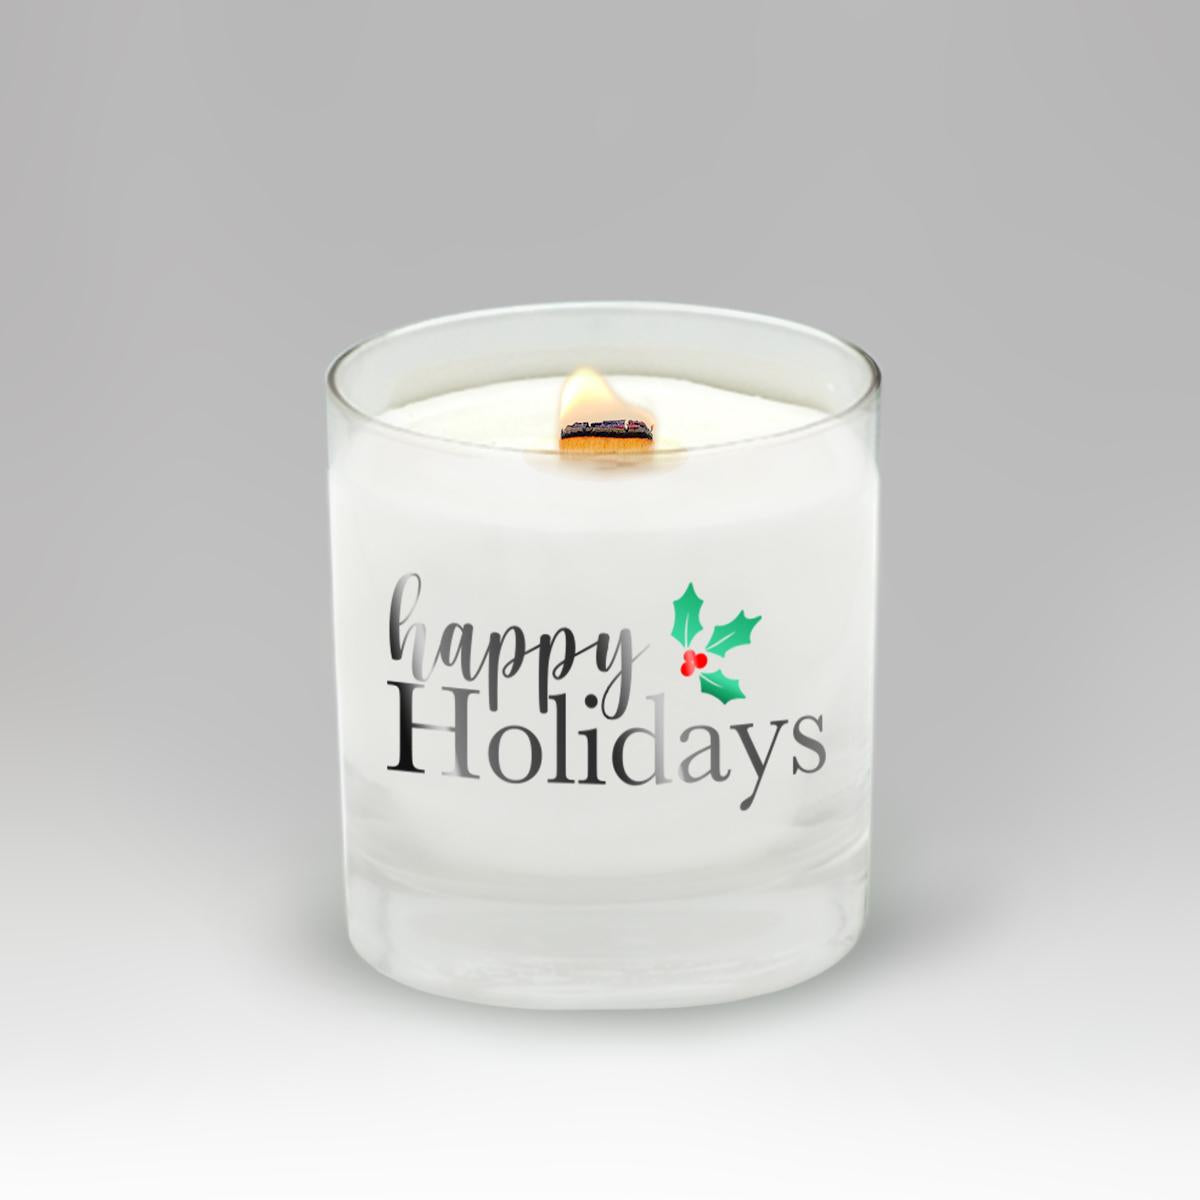 Christmas Soy Candle in Glass